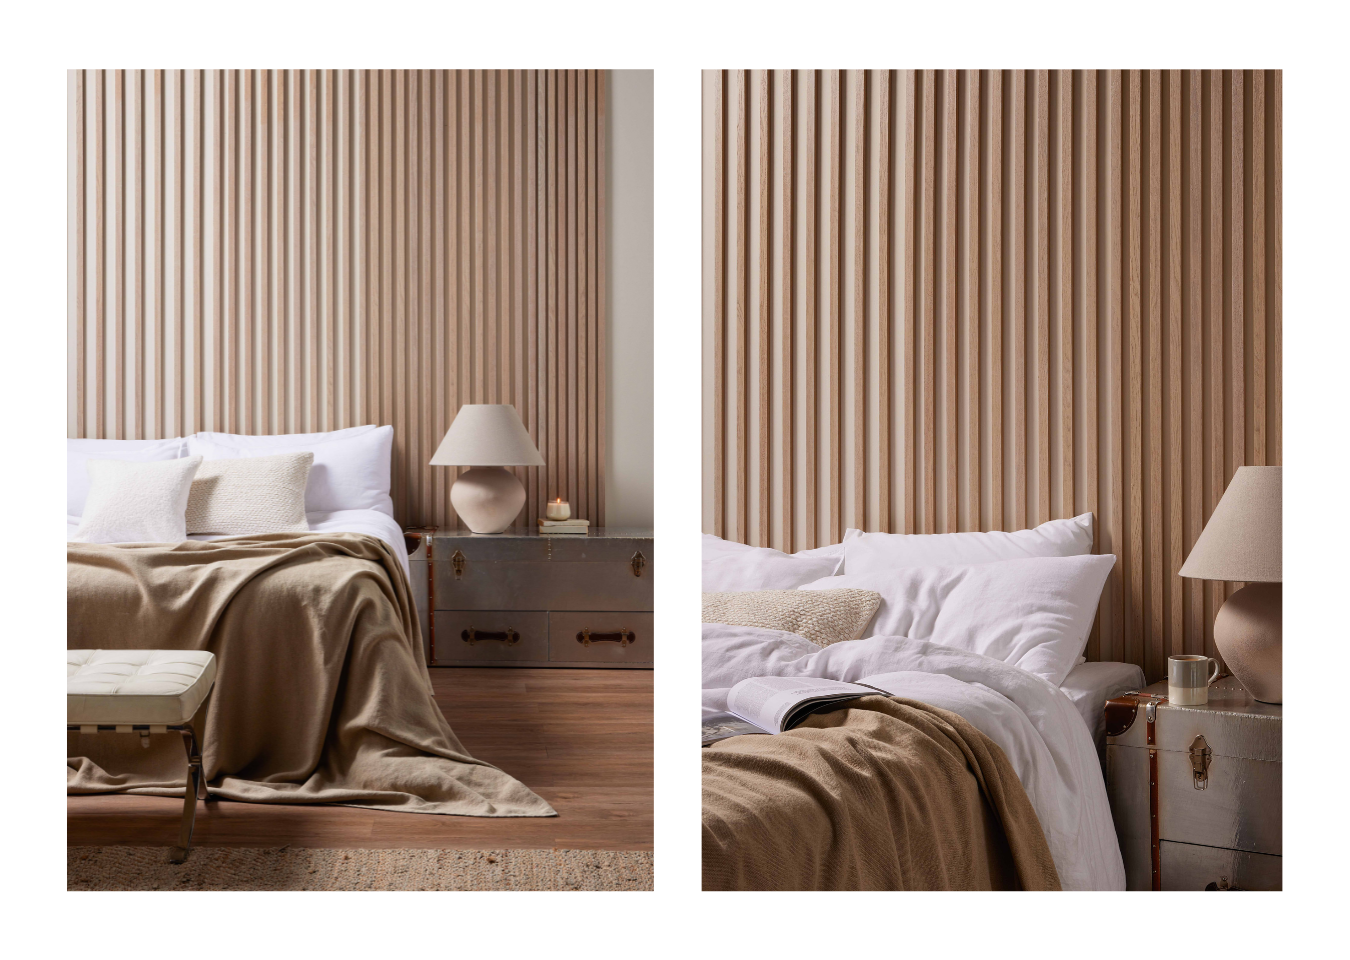 A bedroom headboard wall design made from Individual Slats in Natural Oak, featuring gaps of various sizes between the slats.